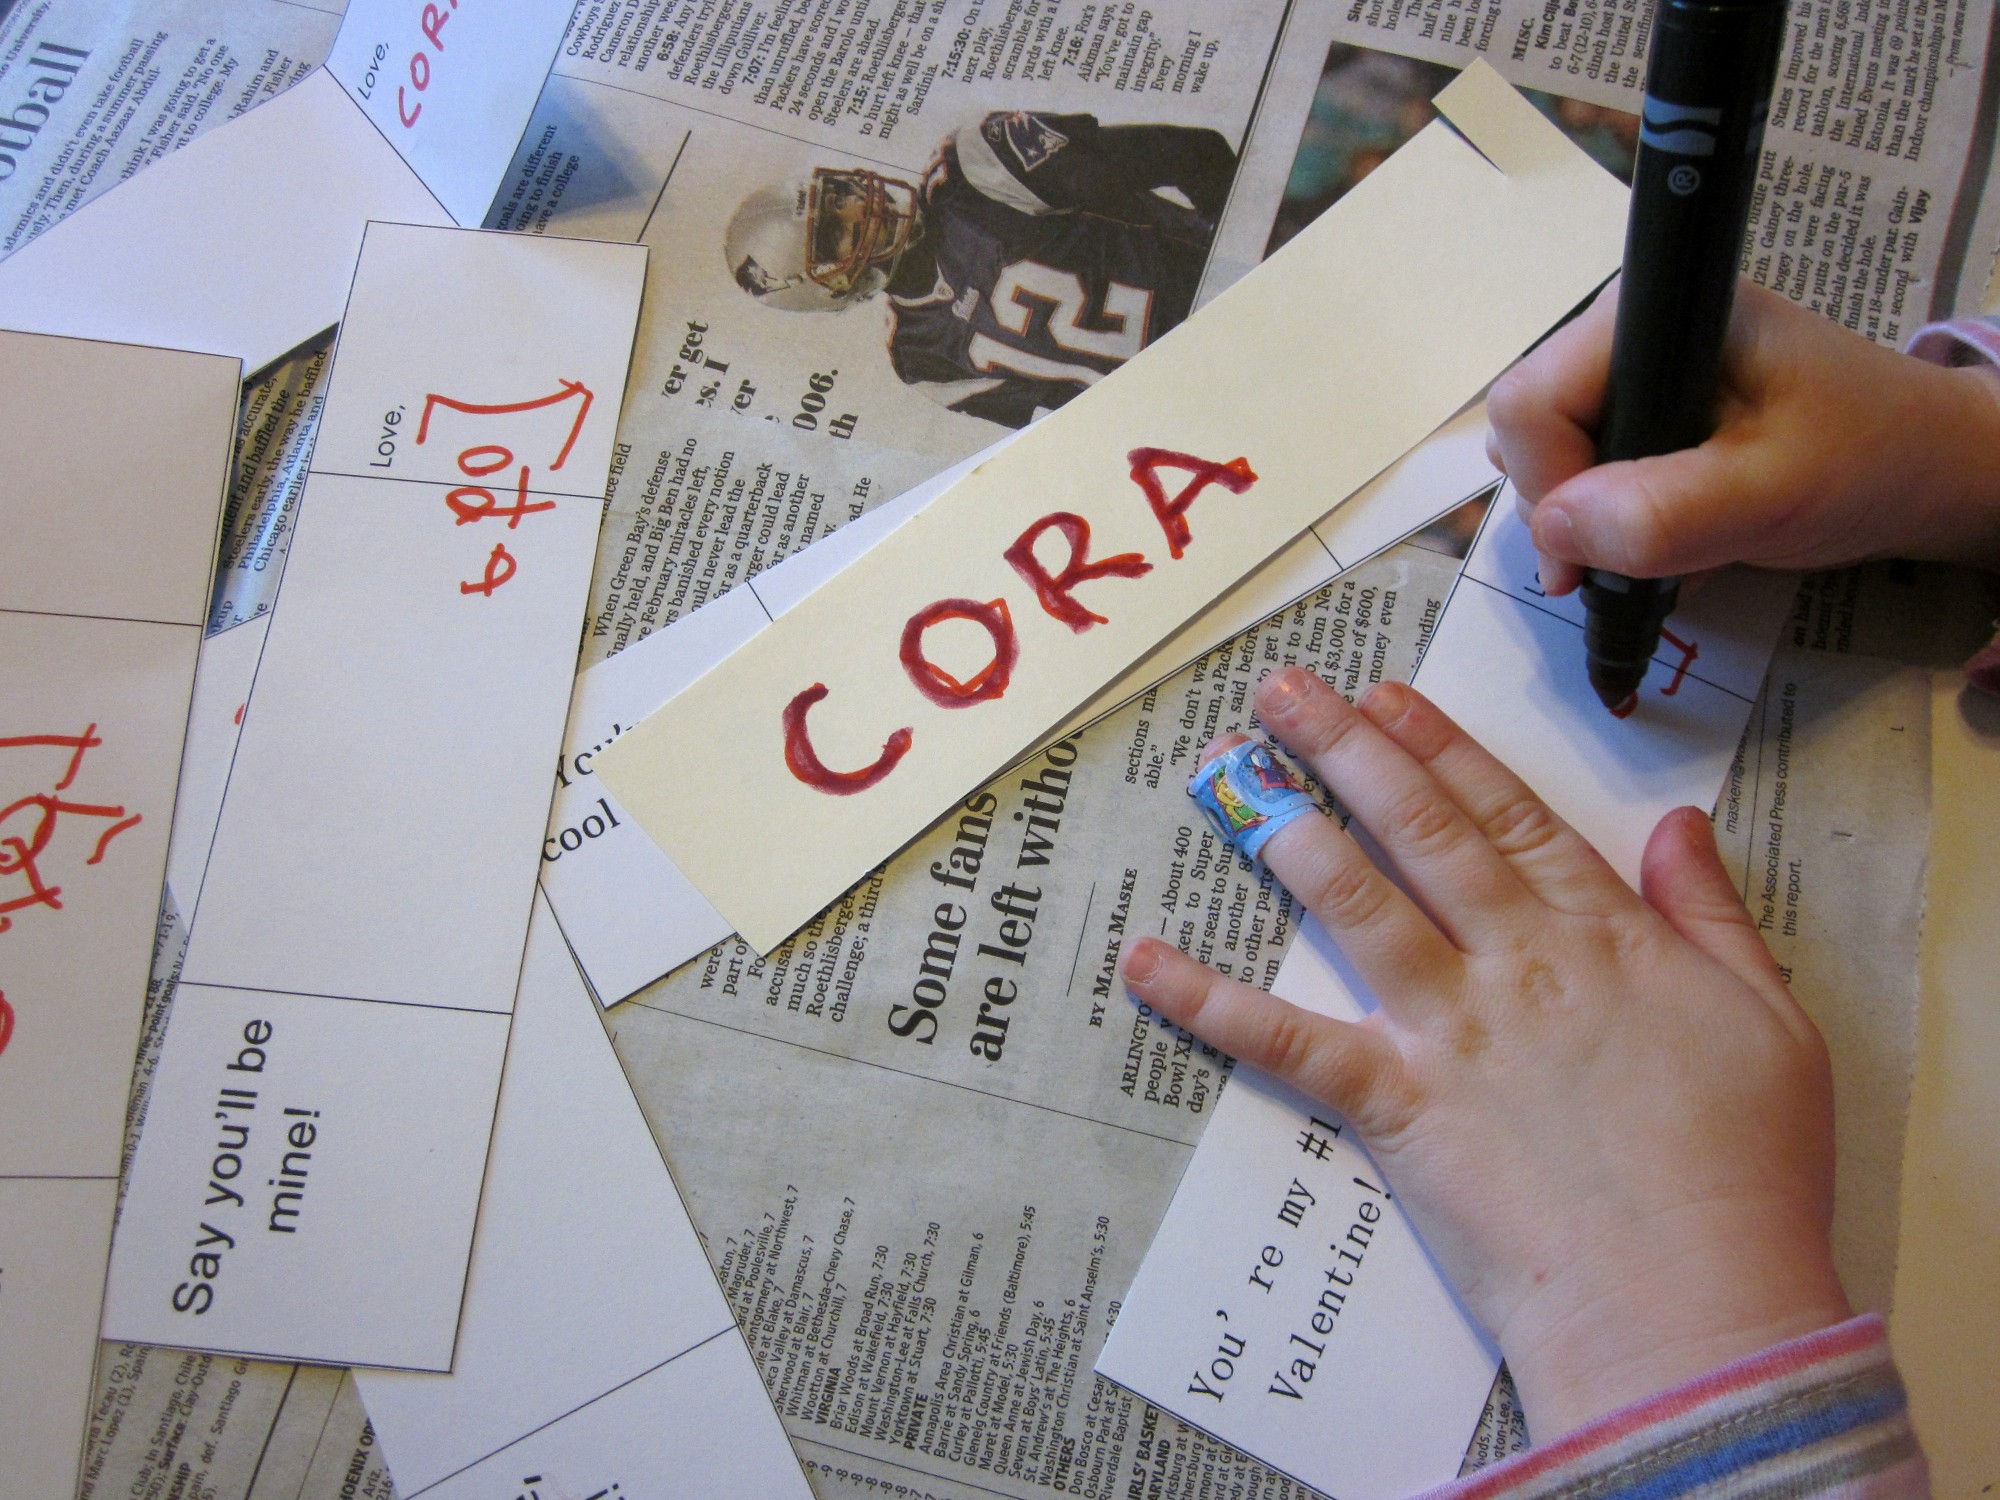 Cora practices her name